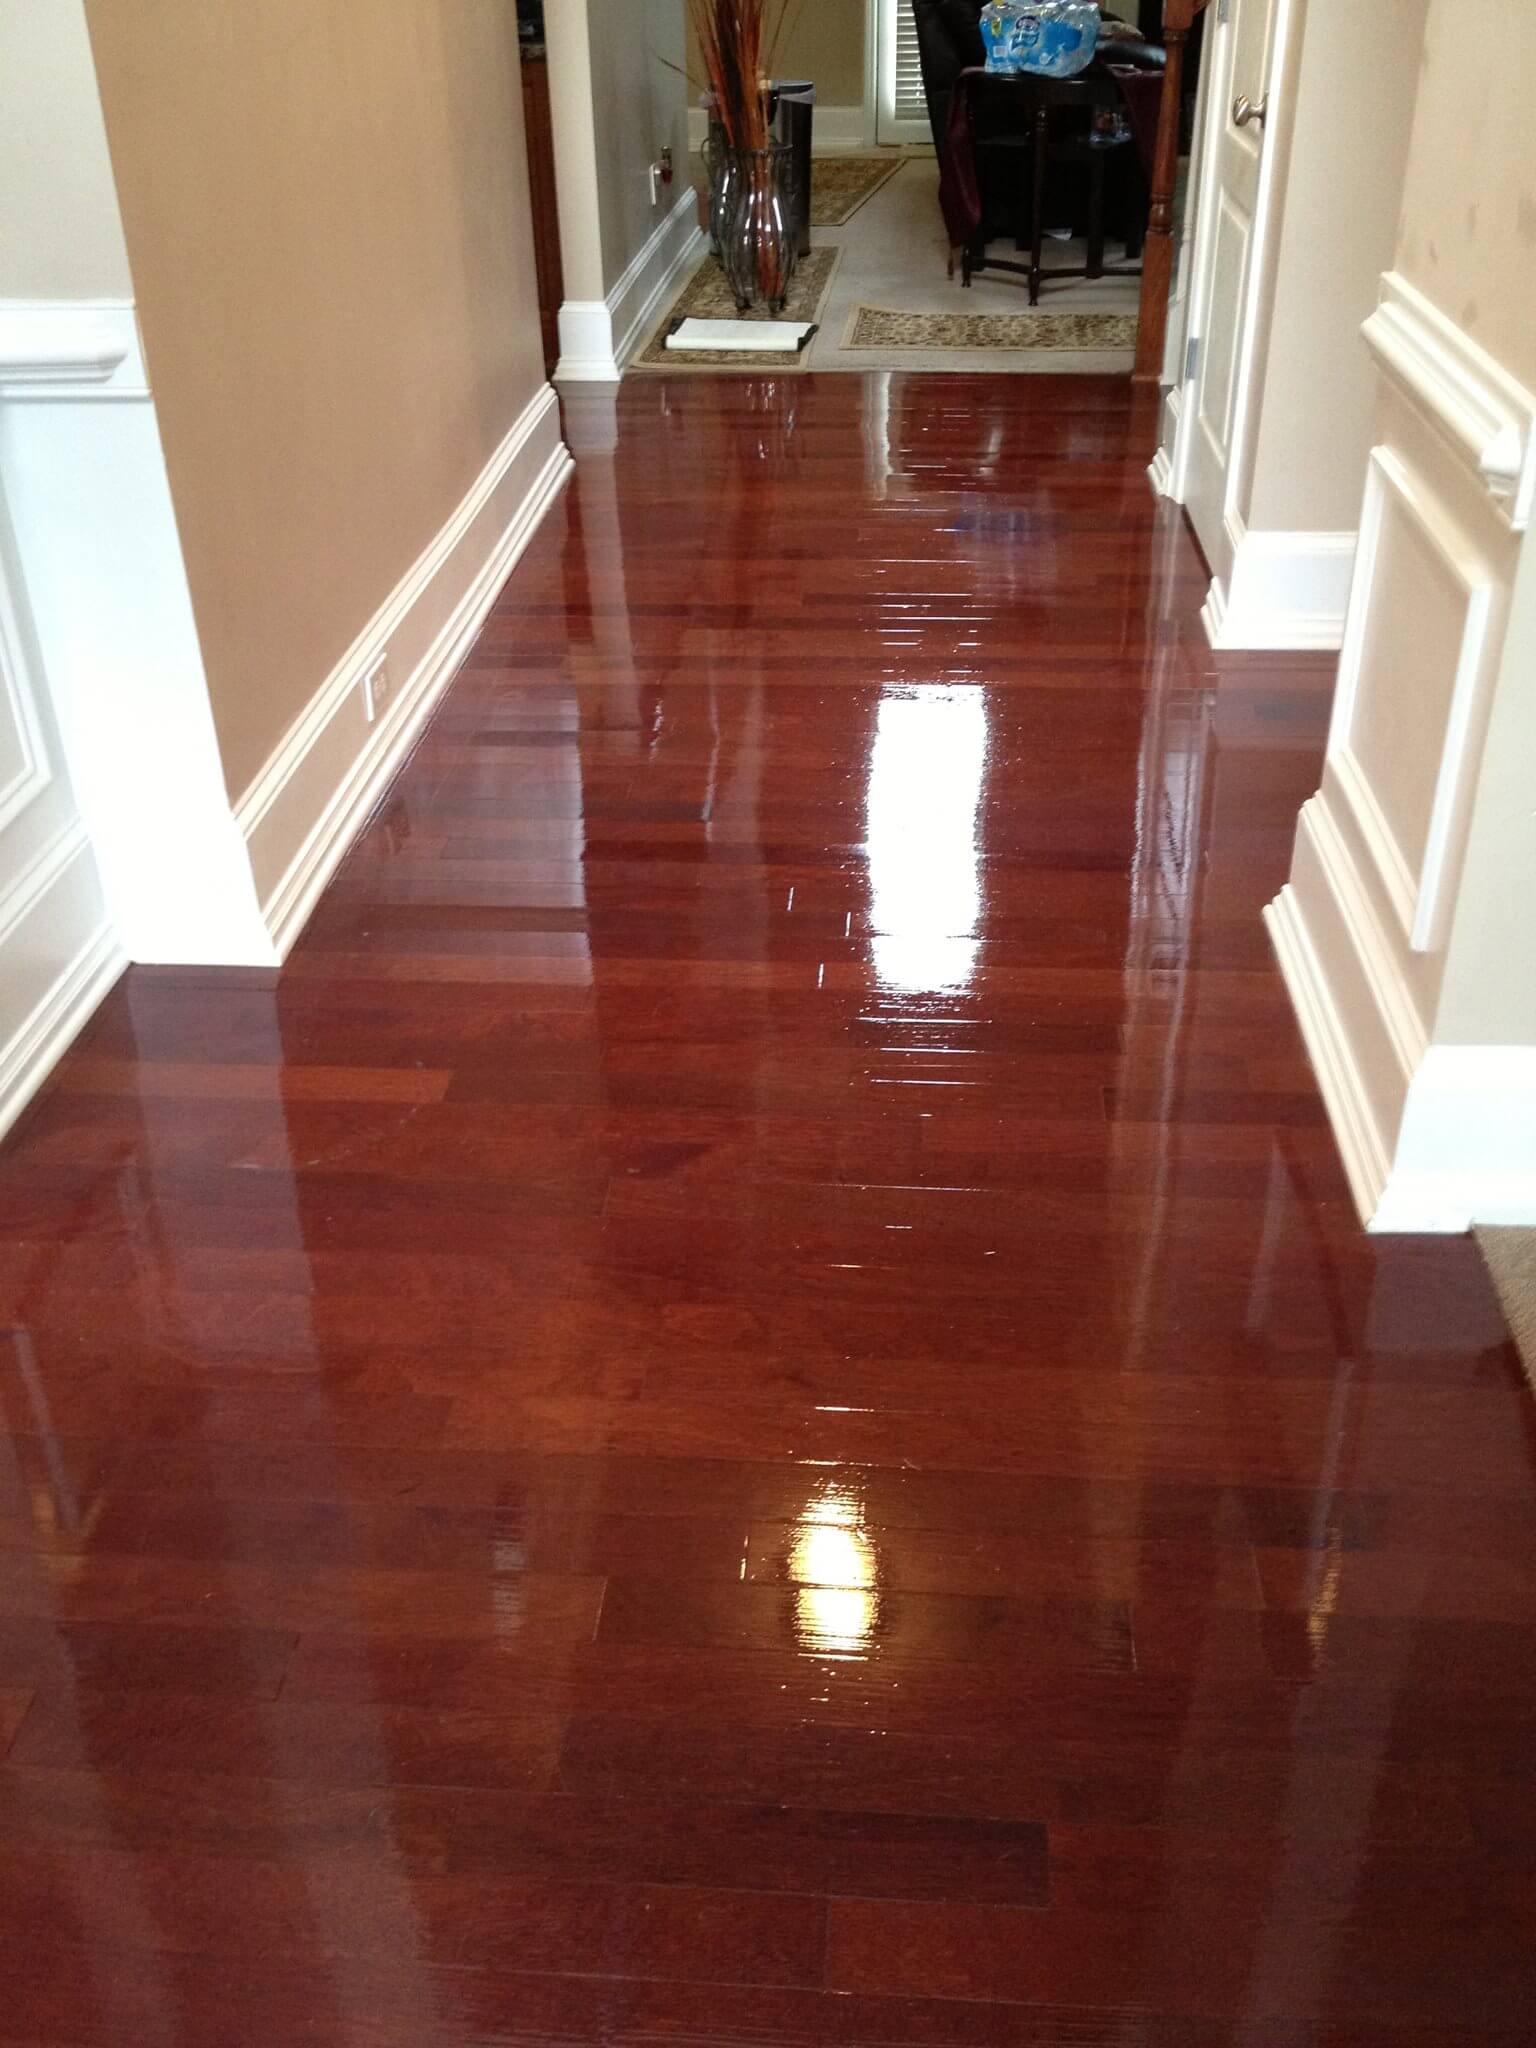 A photo taken after a hardwood floor refinishing